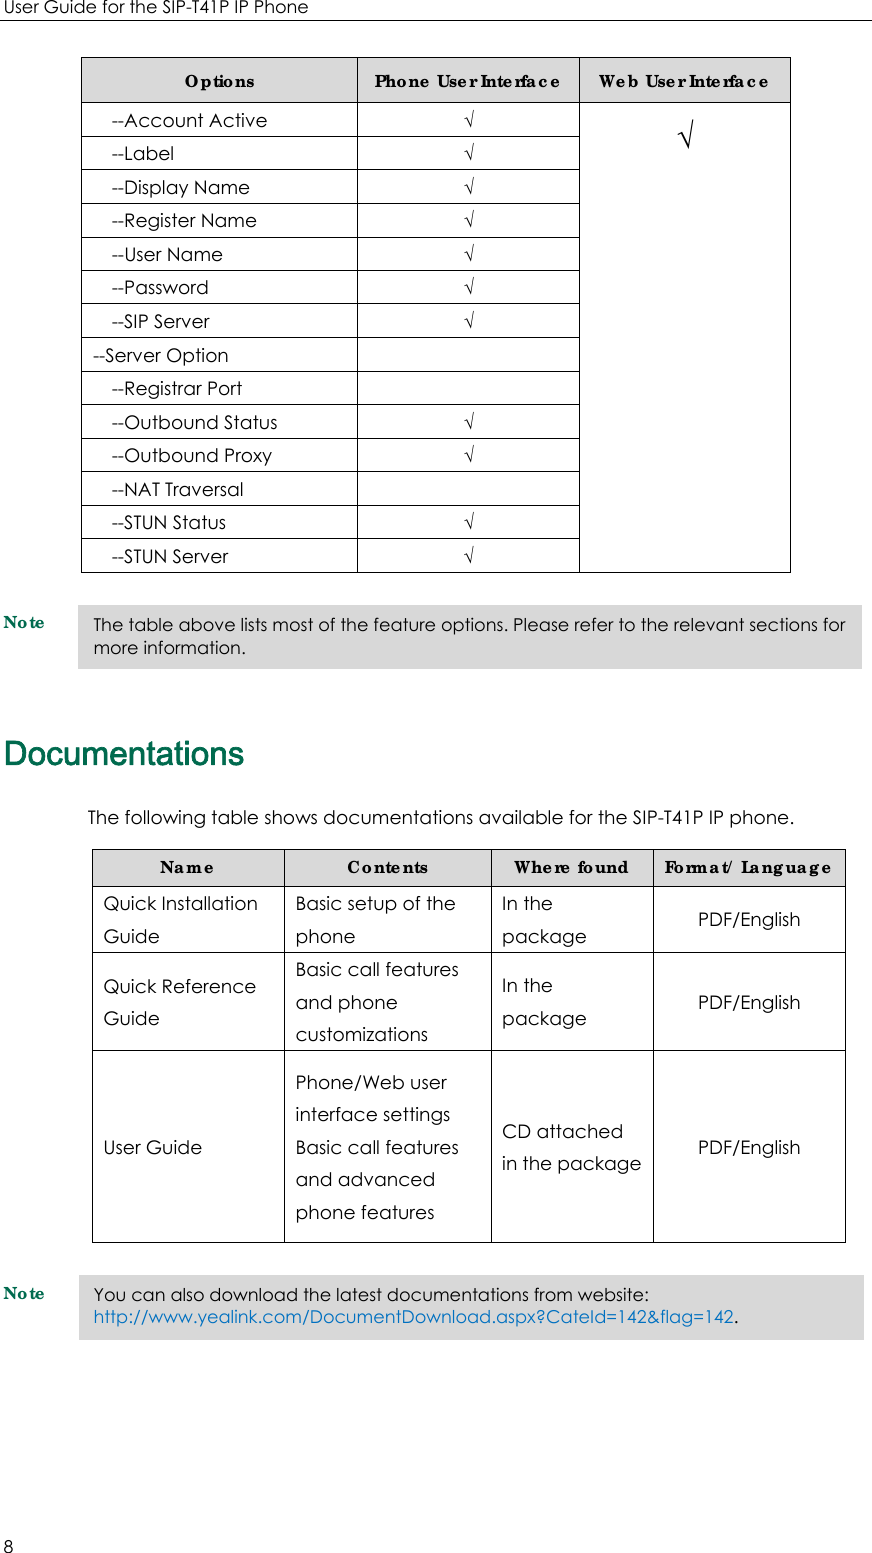 User Guide for the SIP-T41P IP Phone 8 Options  Phone User Interface Web User Interface --Account Active  √ √ --Label  √ --Display Name  √ --Register Name  √ --User Name  √ --Password  √ --SIP Server  √ --Server Option   --Registrar Port   --Outbound Status  √ --Outbound Proxy  √ --NAT Traversal   --STUN Status    √ --STUN Server √ Note Documentations The following table shows documentations available for the SIP-T41P IP phone. Name  Contents  Where found  Format/ Language Quick Installation Guide Basic setup of the phone In the package  PDF/English Quick Reference Guide Basic call features and phone customizations In the package  PDF/English User Guide Phone/Web user interface settings Basic call features and advanced phone features CD attached in the package PDF/English Note The table above lists most of the feature options. Please refer to the relevant sections for more information. You can also download the latest documentations from website: http://www.yealink.com/DocumentDownload.aspx?CateId=142&amp;flag=142. 